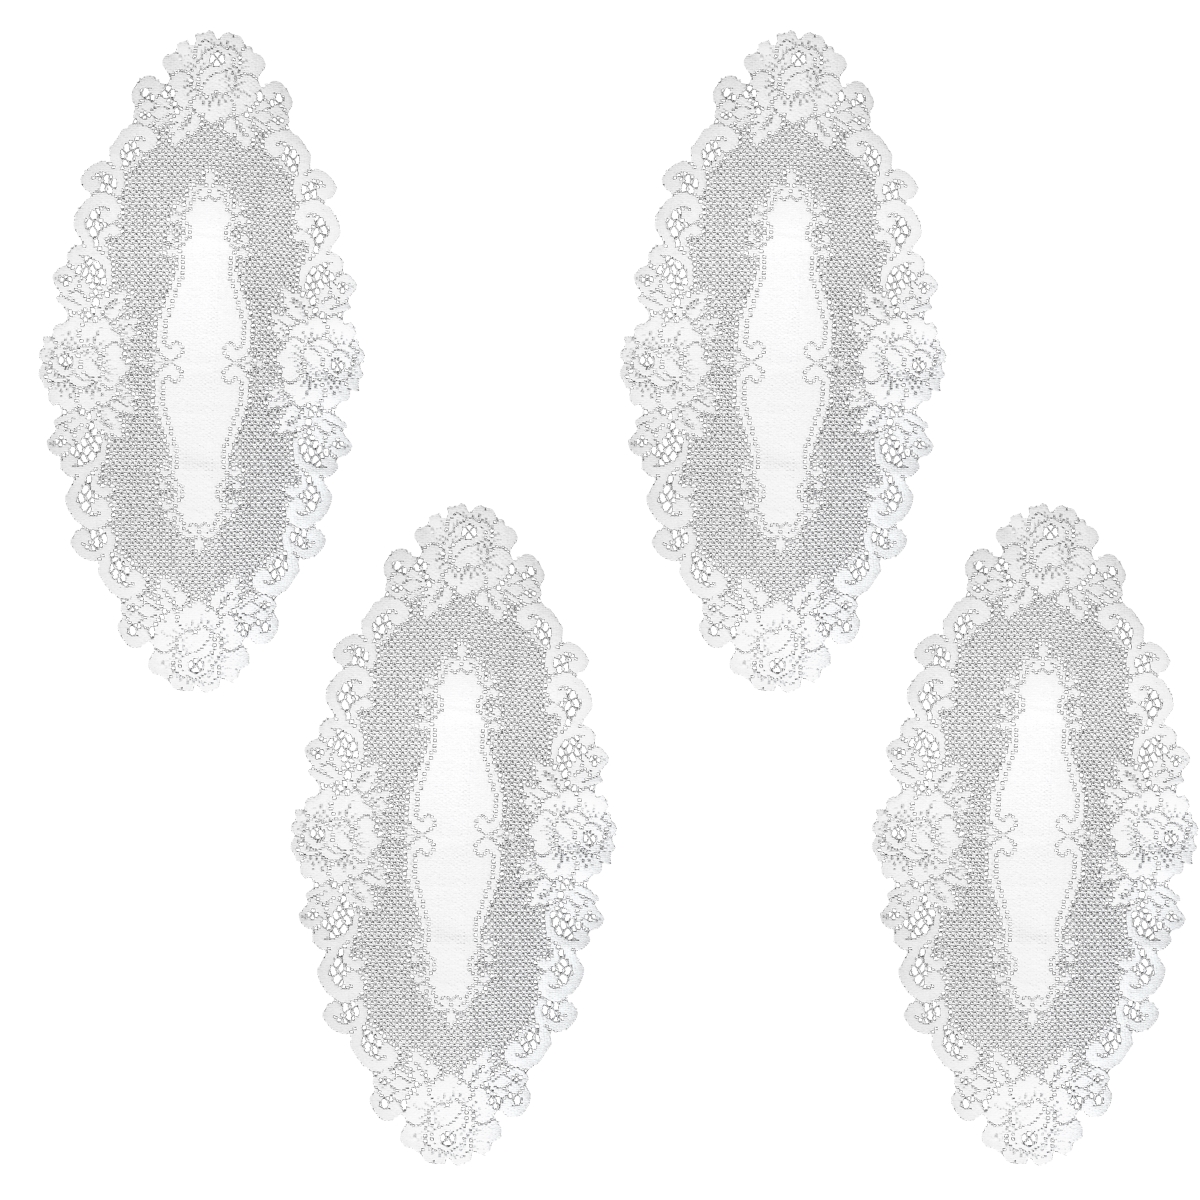 Picture of Heritage Lace VT-1224W-S 12 x 24 in. Vintage Rose Doilies, White - Set of 4